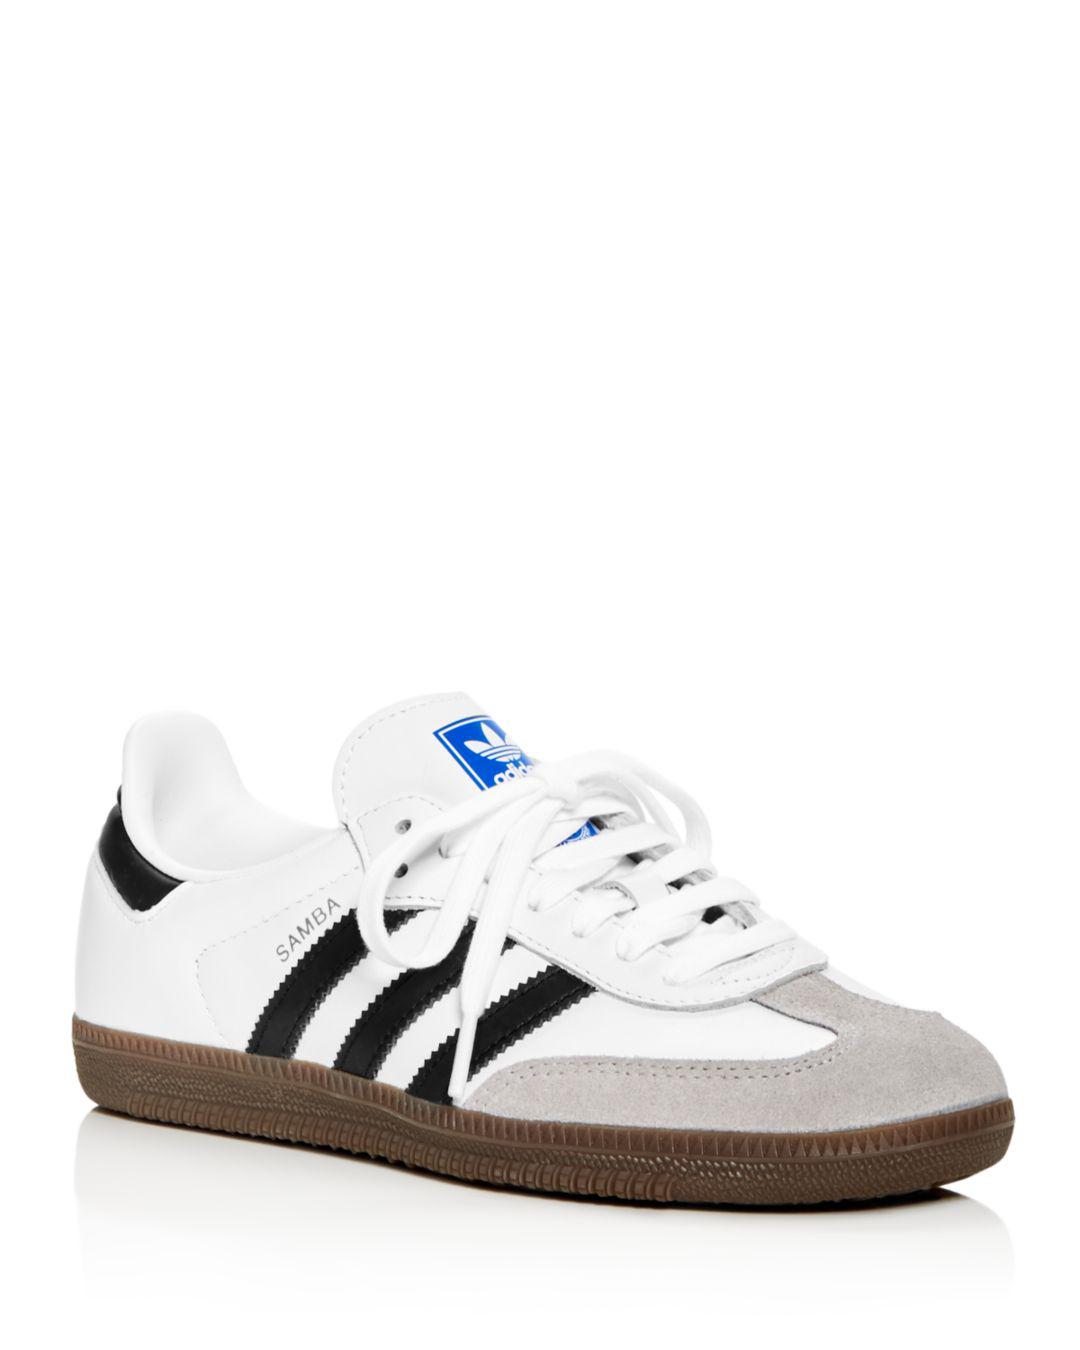 adidas Women's Samba Og Leather & Suede Lace Up Sneakers in White/Black  (White) - Lyst